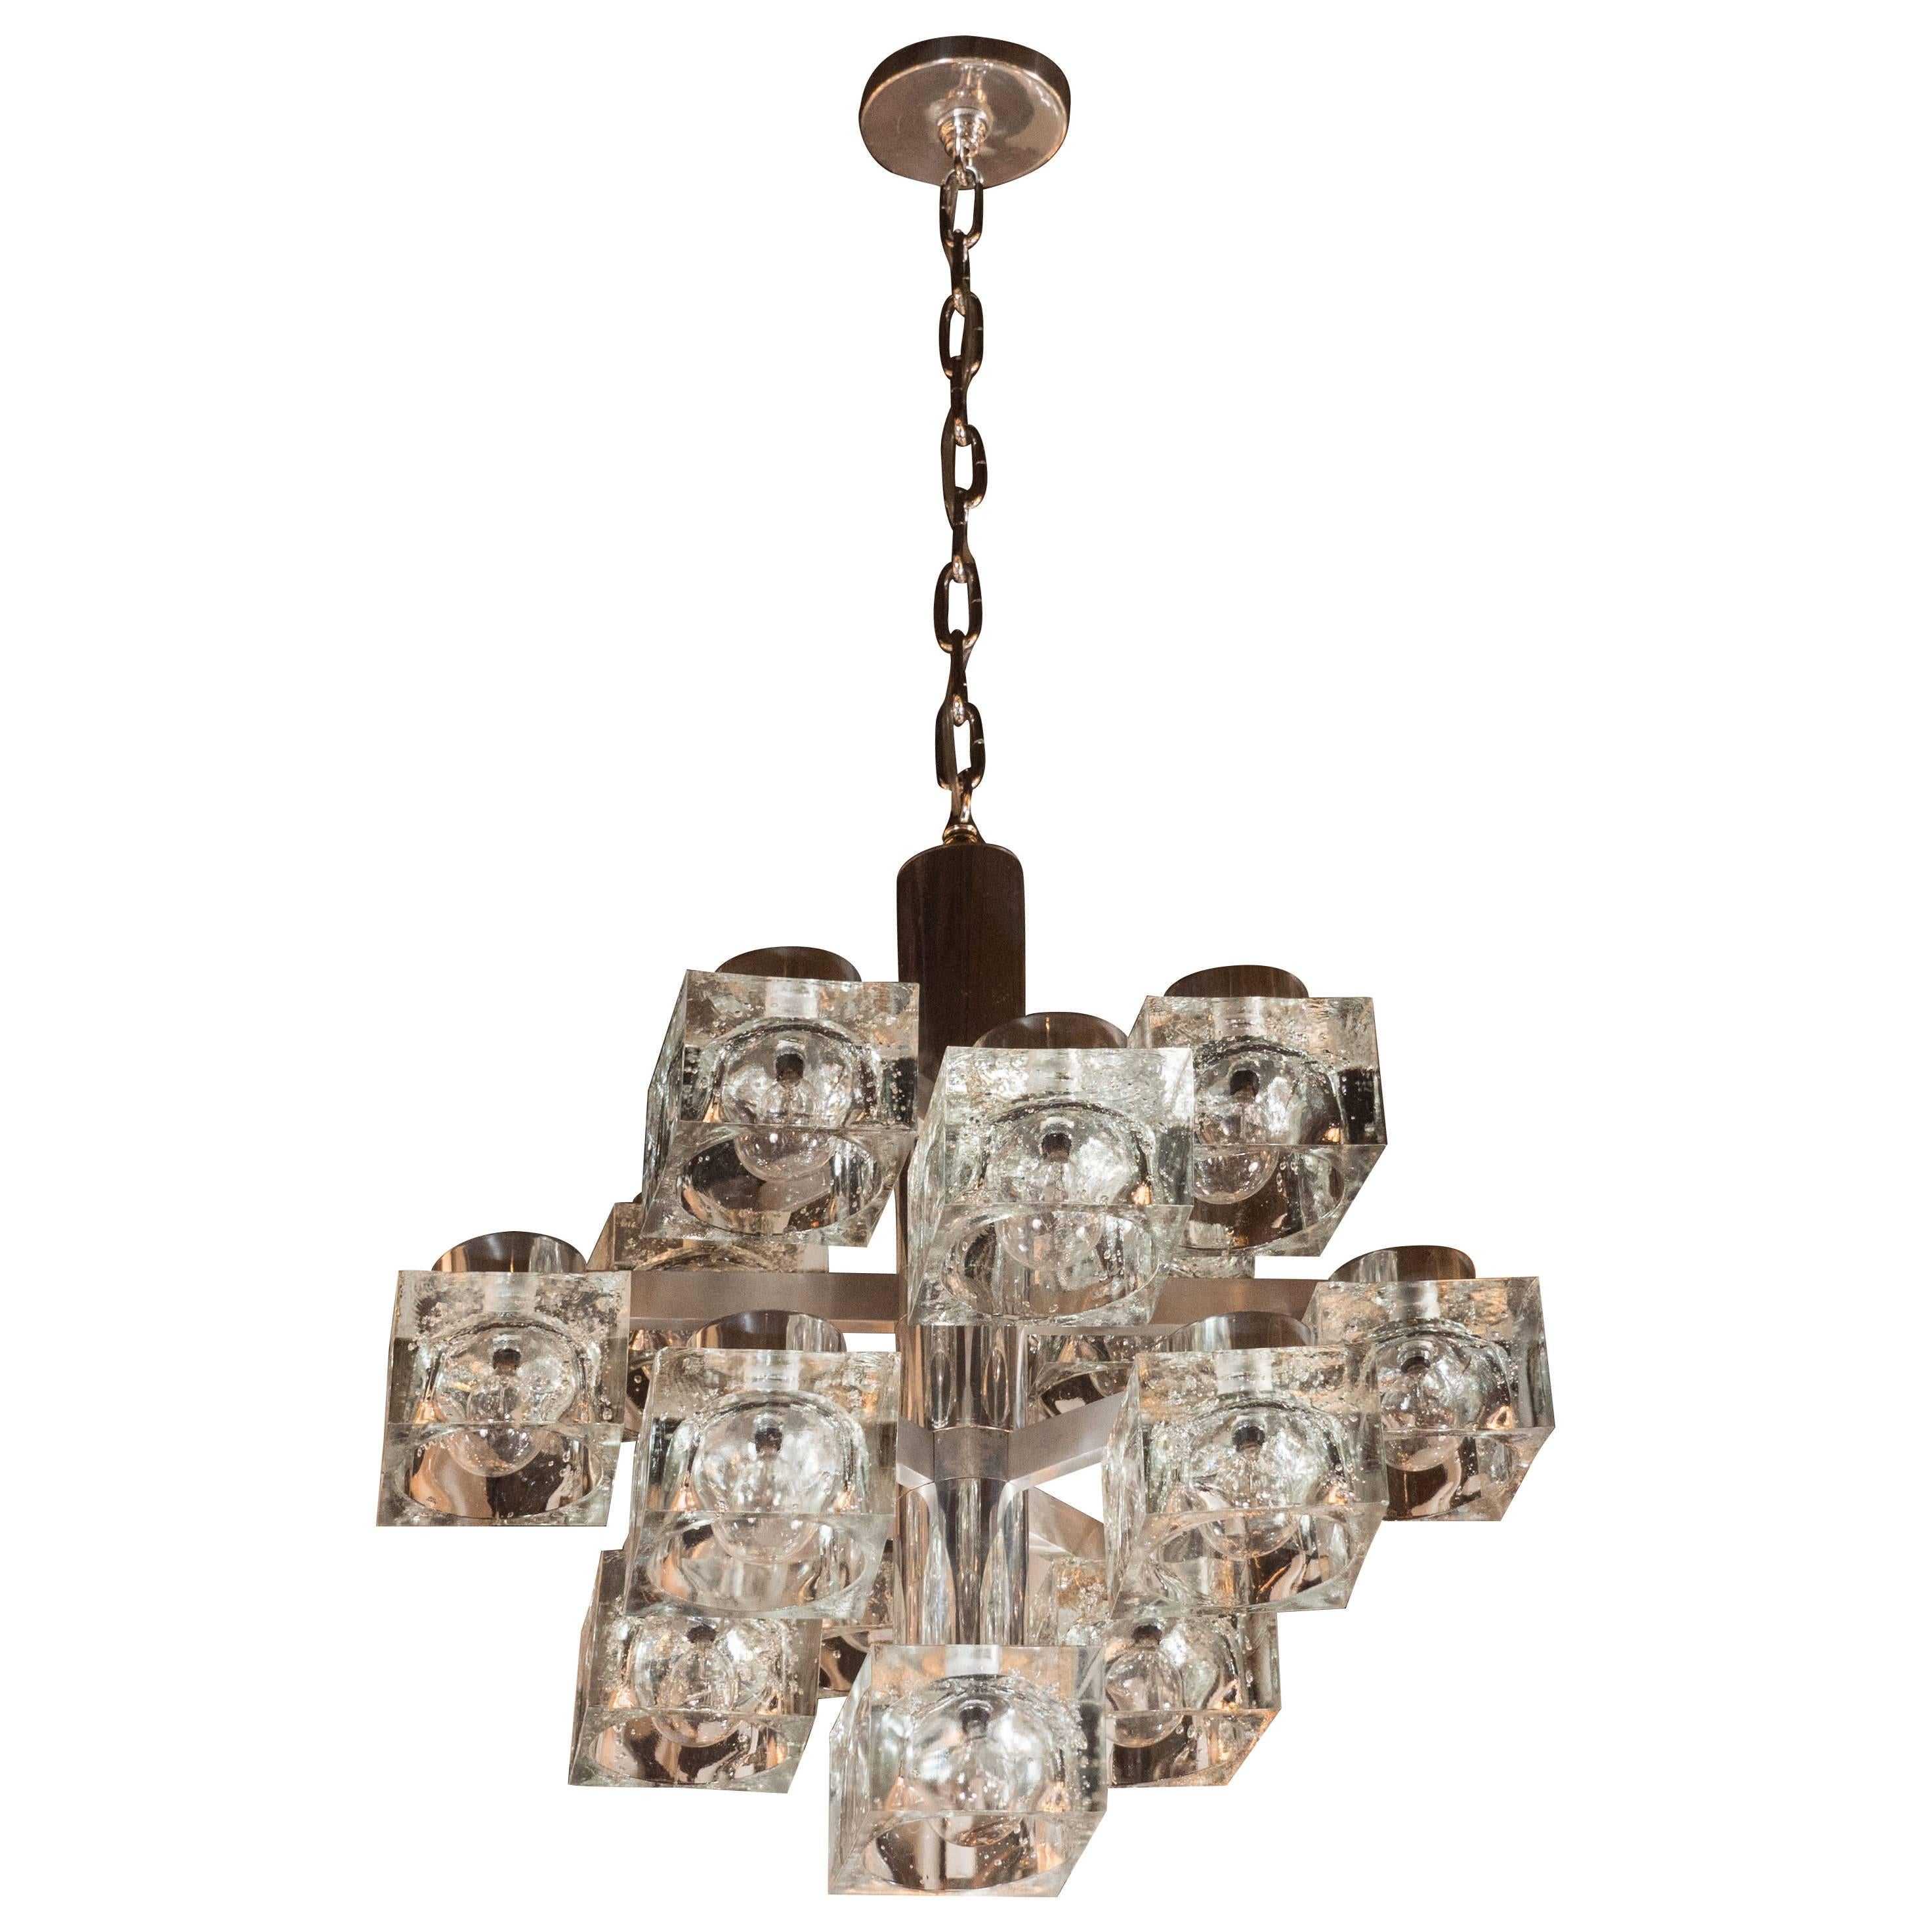 Mid-Century Modern Polished & Brushed Chrome & Cube Glass Chandelier by Sciolari